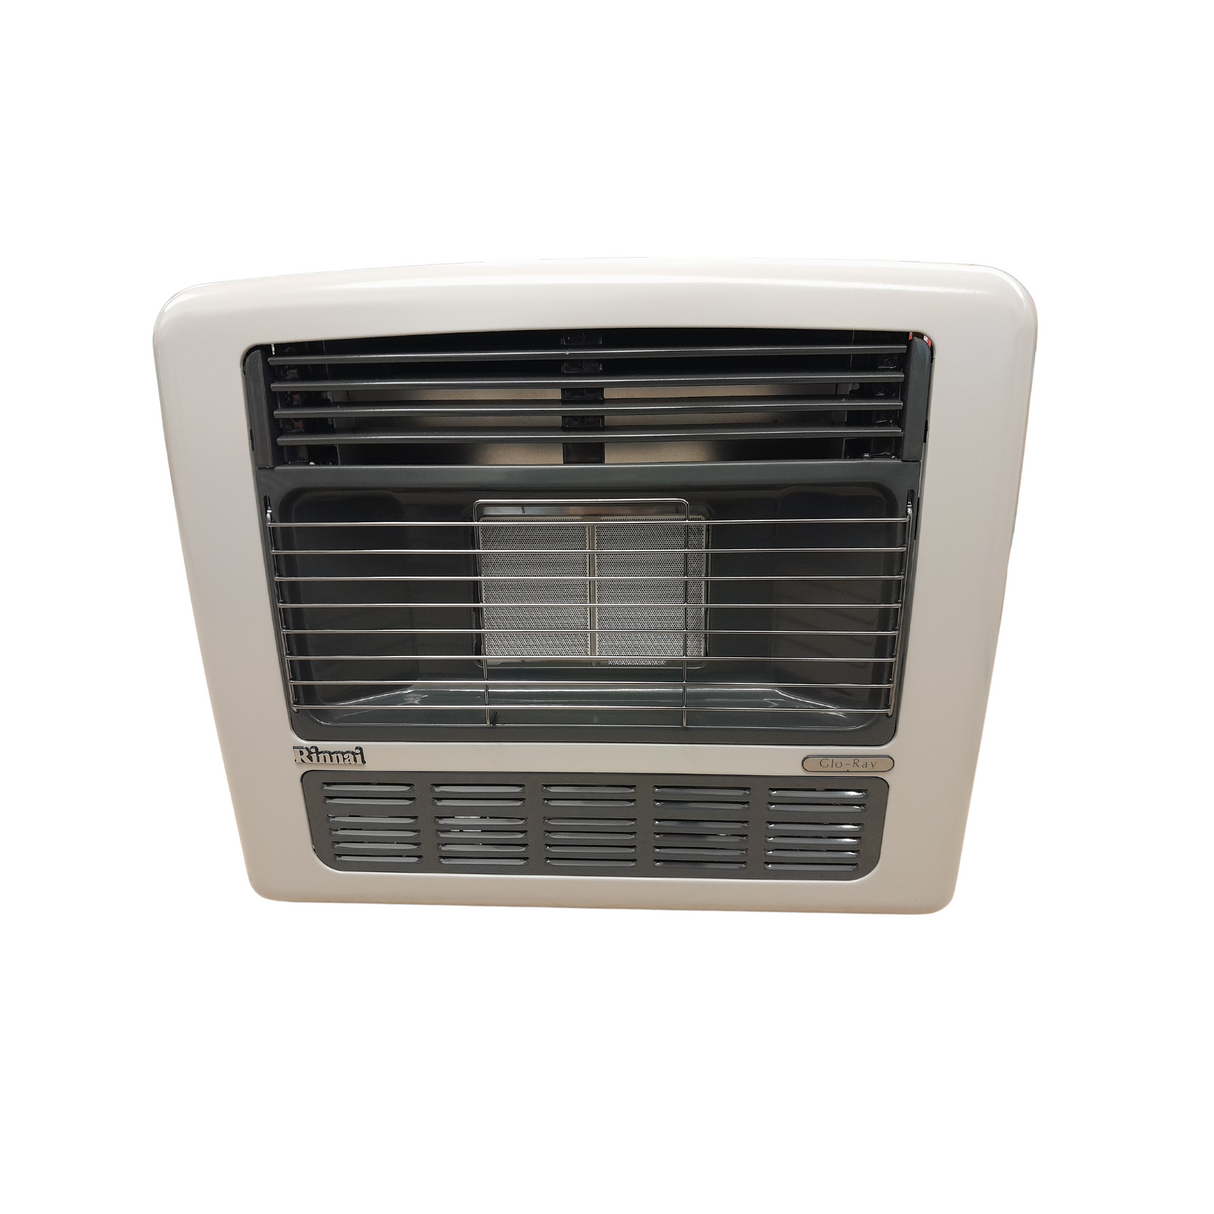 Rinnai - REH15DF - Natural Gas "Infra-Red" Radiant Heater 'Glo-Ray w/Fan' (Limited Availability)